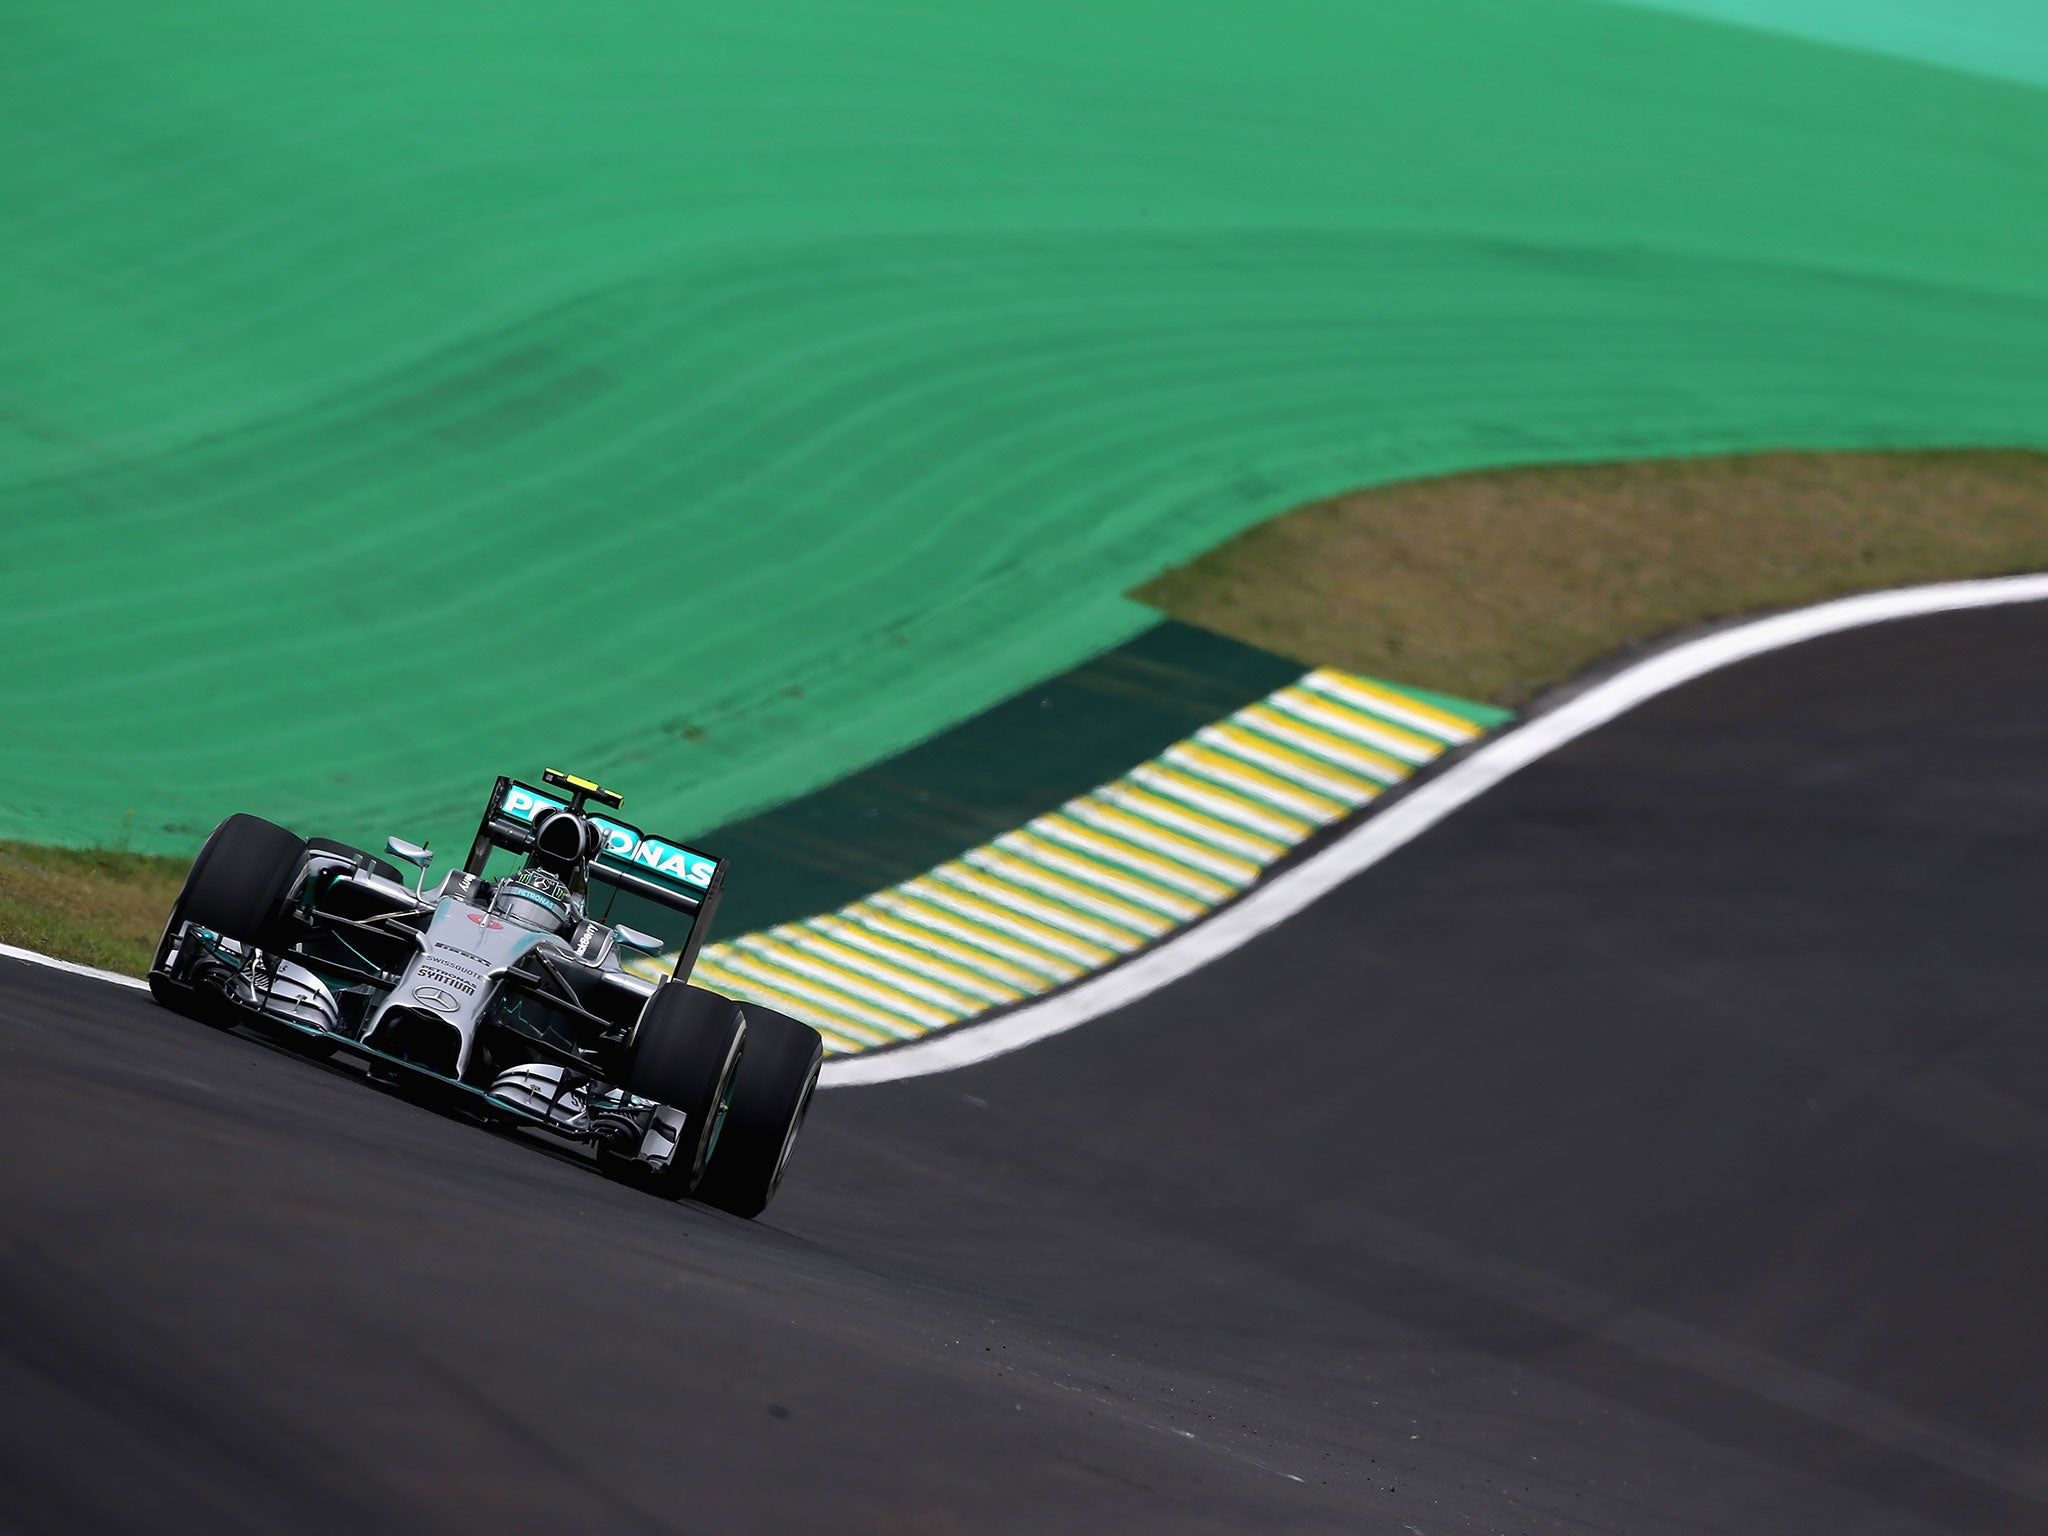 Nico Rosberg set the fastest time of the morning session